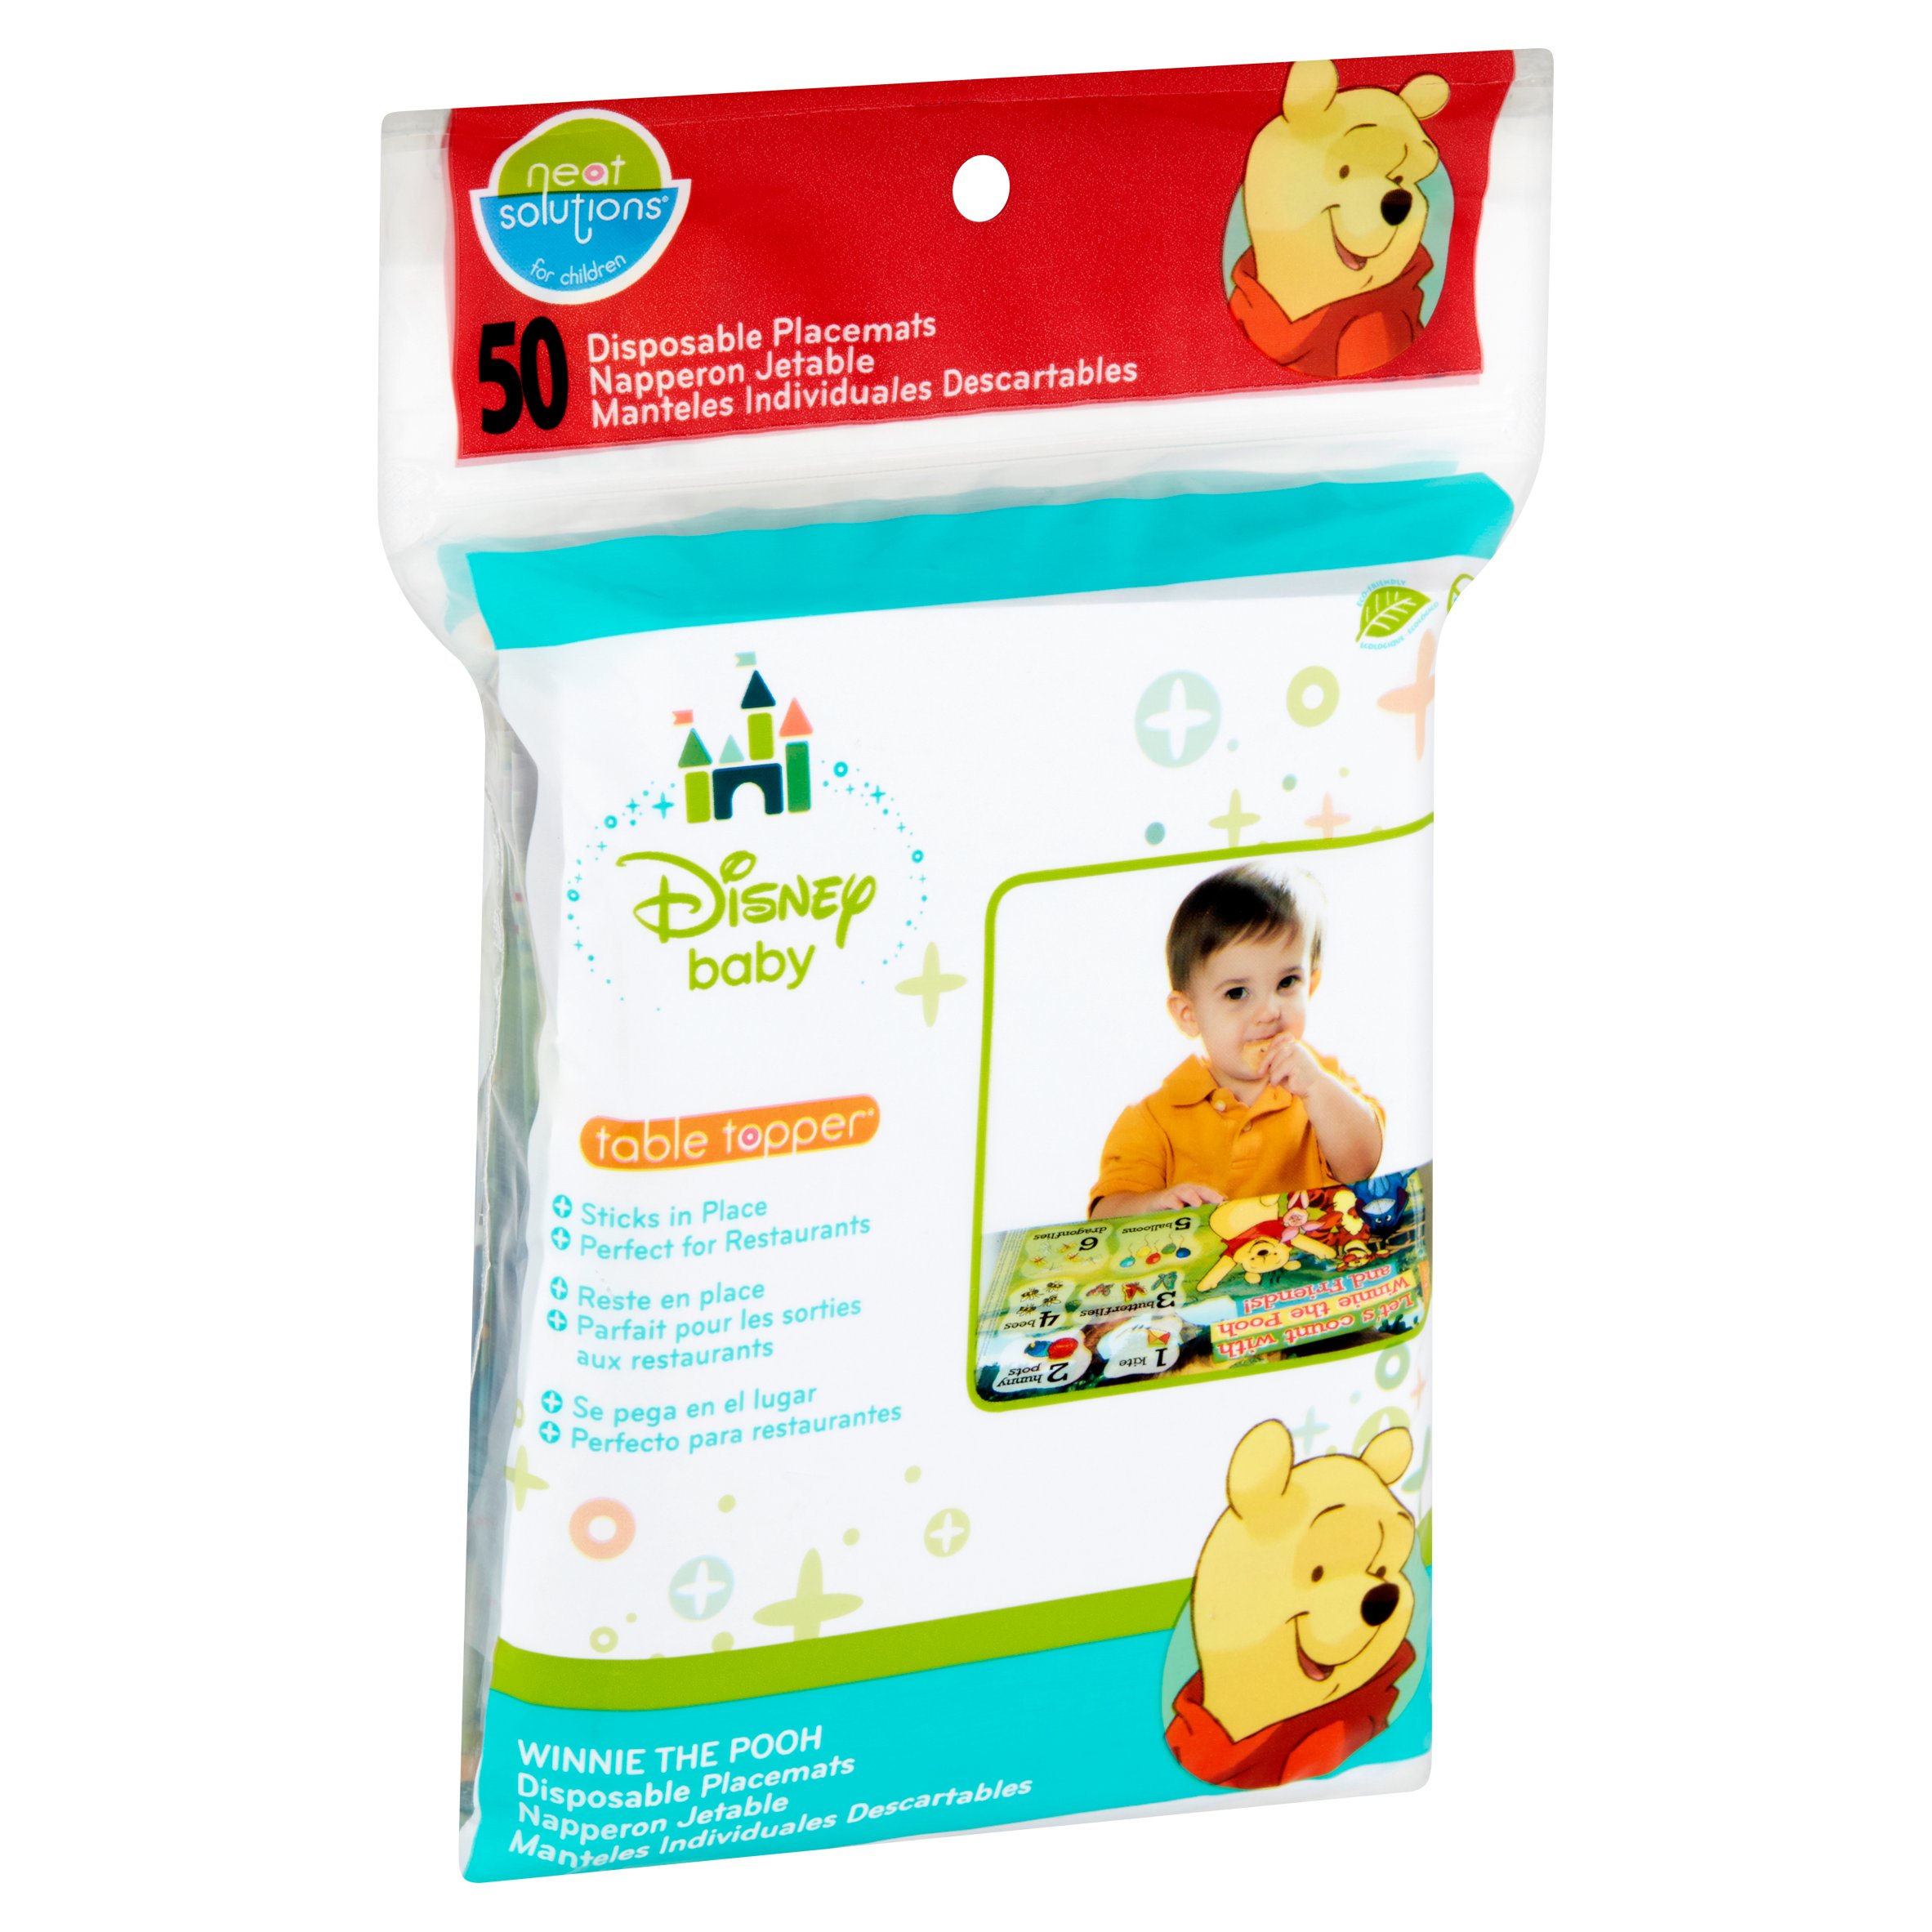 Neat Solutions for Children Disney Baby Table Topper Disposable Placemats, 50 count - image 2 of 5